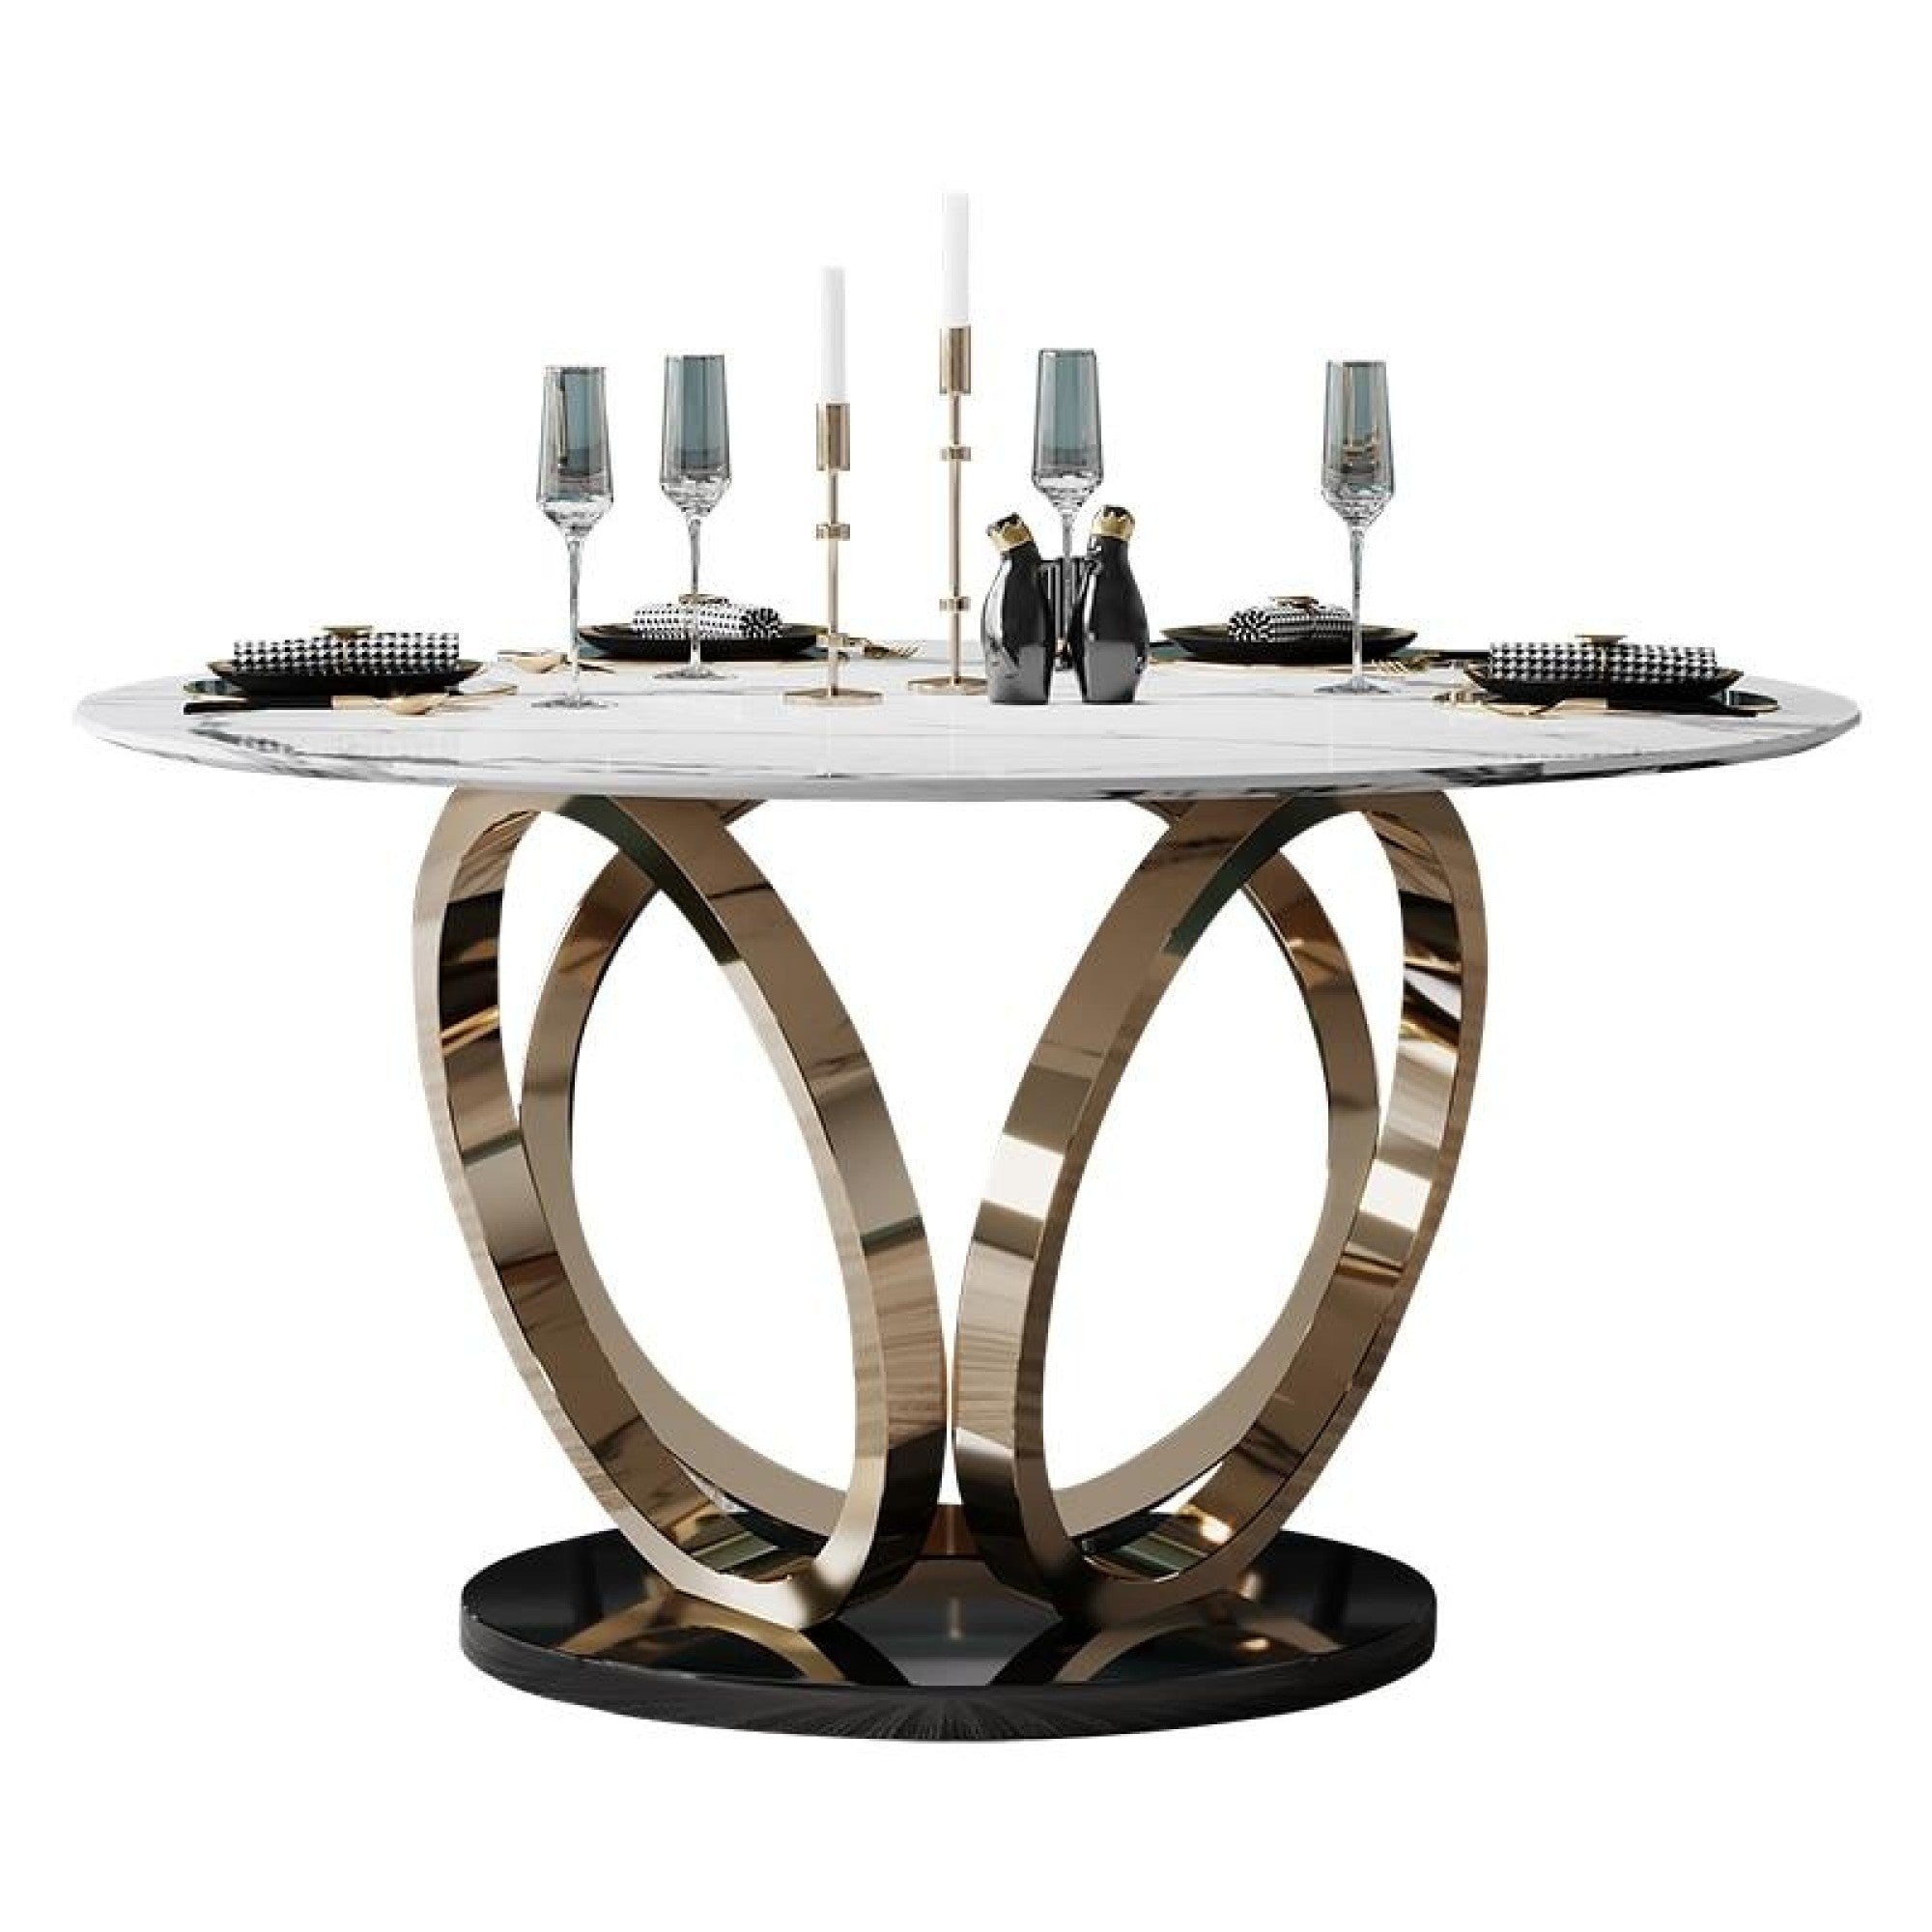 Attractive Flower Base Designed Metal Round Dining Table My Aashis